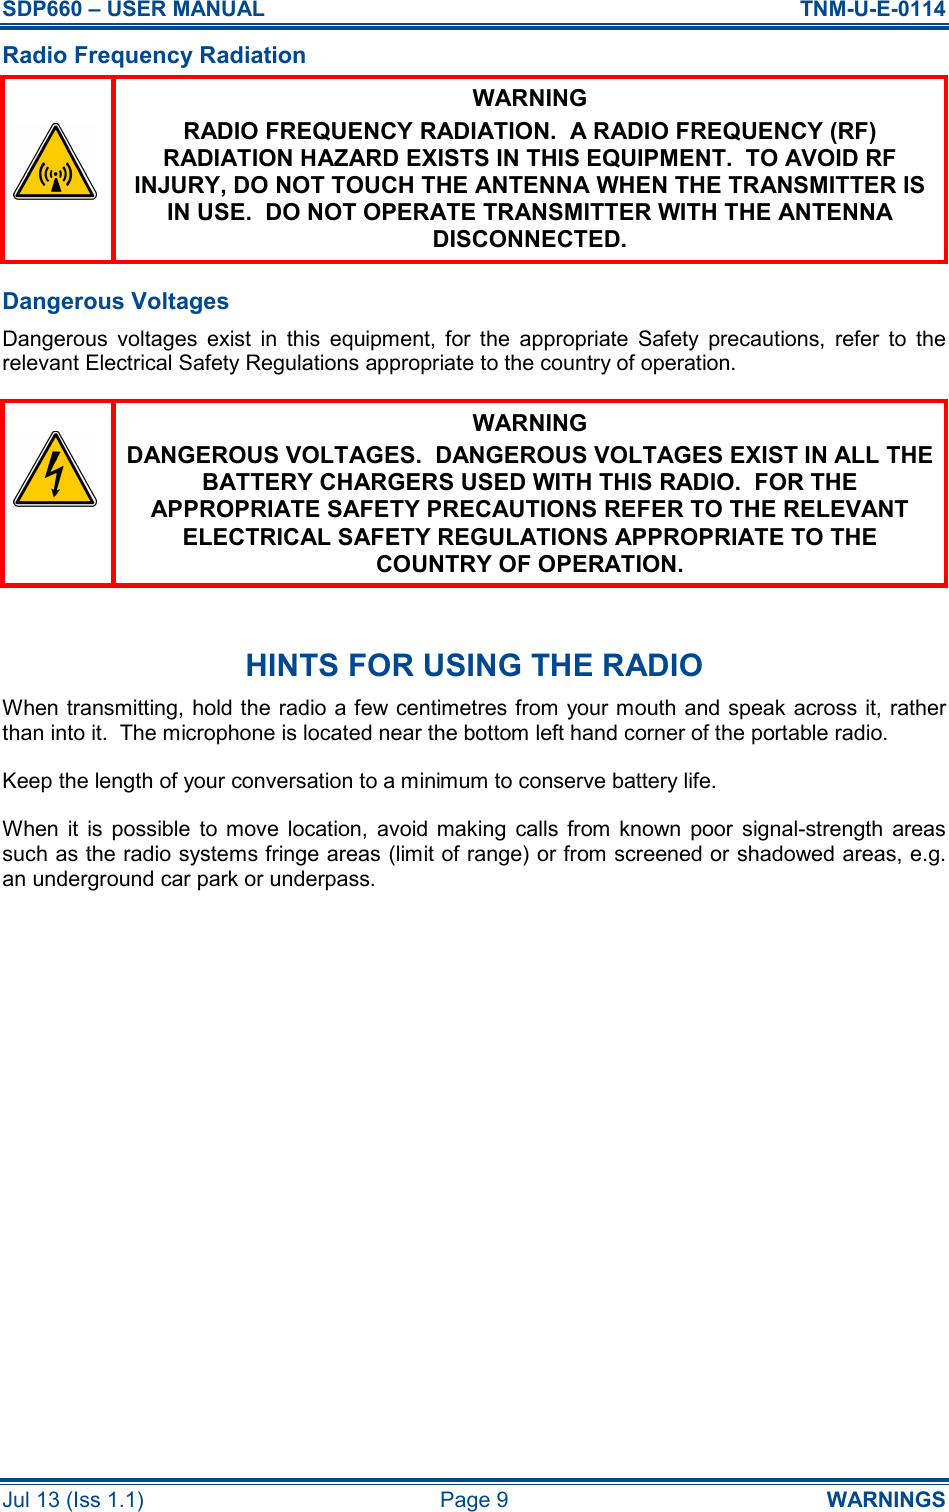 SDP660 – USER MANUAL  TNM-U-E-0114 Jul 13 (Iss 1.1)  Page 9  WARNINGS Radio Frequency Radiation  WARNING RADIO FREQUENCY RADIATION.  A RADIO FREQUENCY (RF) RADIATION HAZARD EXISTS IN THIS EQUIPMENT.  TO AVOID RF INJURY, DO NOT TOUCH THE ANTENNA WHEN THE TRANSMITTER IS IN USE.  DO NOT OPERATE TRANSMITTER WITH THE ANTENNA DISCONNECTED. Dangerous Voltages Dangerous  voltages  exist  in  this  equipment,  for  the  appropriate  Safety  precautions,  refer  to  the relevant Electrical Safety Regulations appropriate to the country of operation.  WARNING DANGEROUS VOLTAGES.  DANGEROUS VOLTAGES EXIST IN ALL THE BATTERY CHARGERS USED WITH THIS RADIO.  FOR THE APPROPRIATE SAFETY PRECAUTIONS REFER TO THE RELEVANT ELECTRICAL SAFETY REGULATIONS APPROPRIATE TO THE COUNTRY OF OPERATION.  HINTS FOR USING THE RADIO When transmitting, hold the radio a few centimetres from your mouth and speak across it, rather than into it.  The microphone is located near the bottom left hand corner of the portable radio. Keep the length of your conversation to a minimum to conserve battery life. When  it  is  possible  to  move  location,  avoid  making  calls  from  known  poor  signal-strength  areas such as the radio systems fringe areas (limit of range) or from screened or shadowed areas, e.g. an underground car park or underpass.    